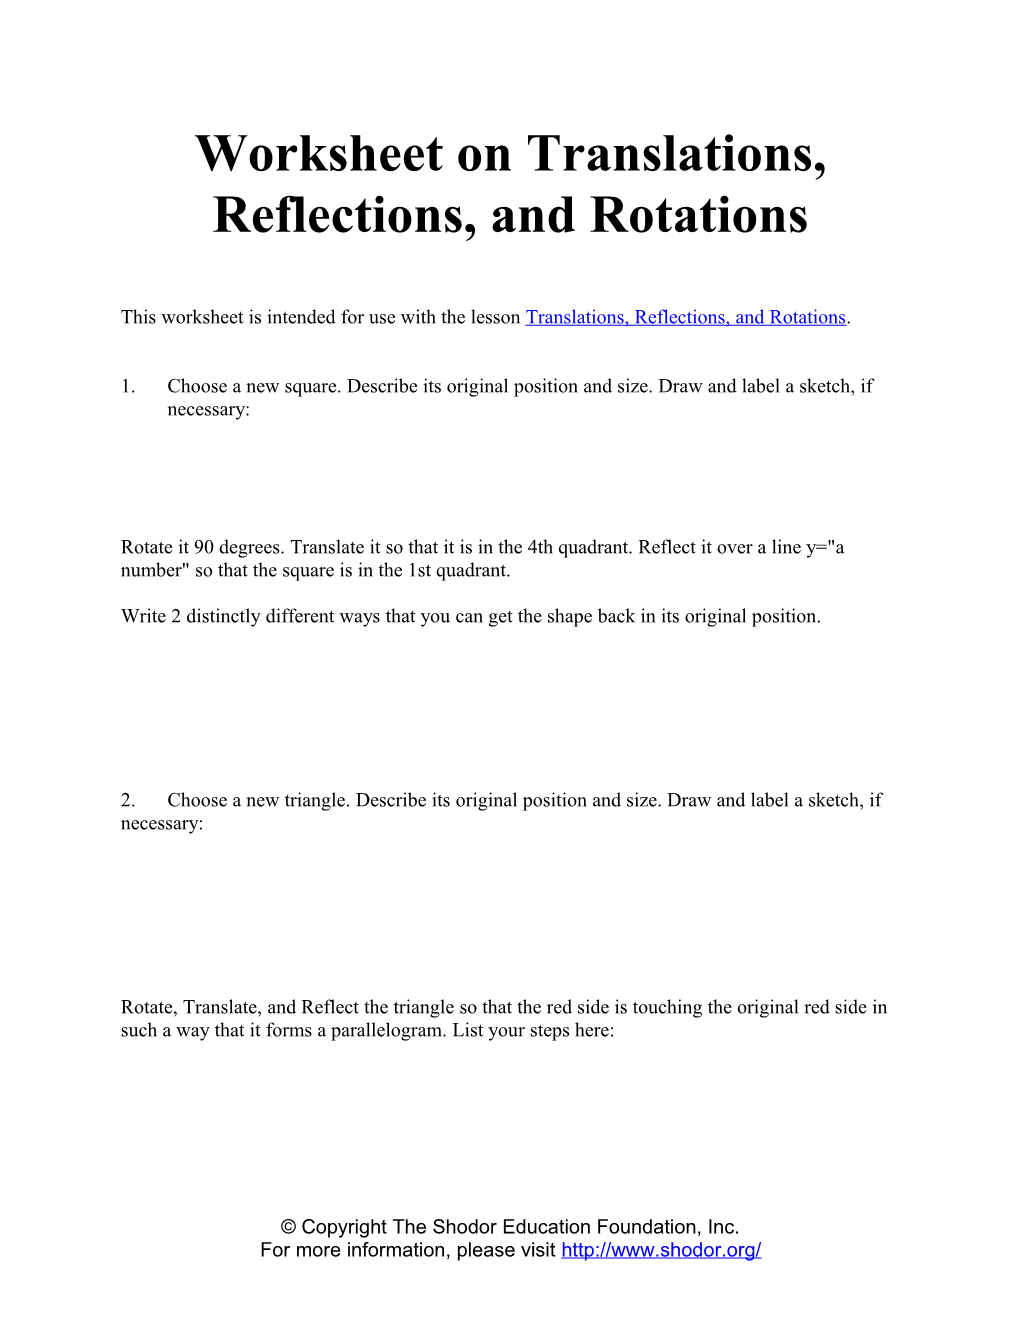 Worksheet on Translations, Reflections, and Rotations